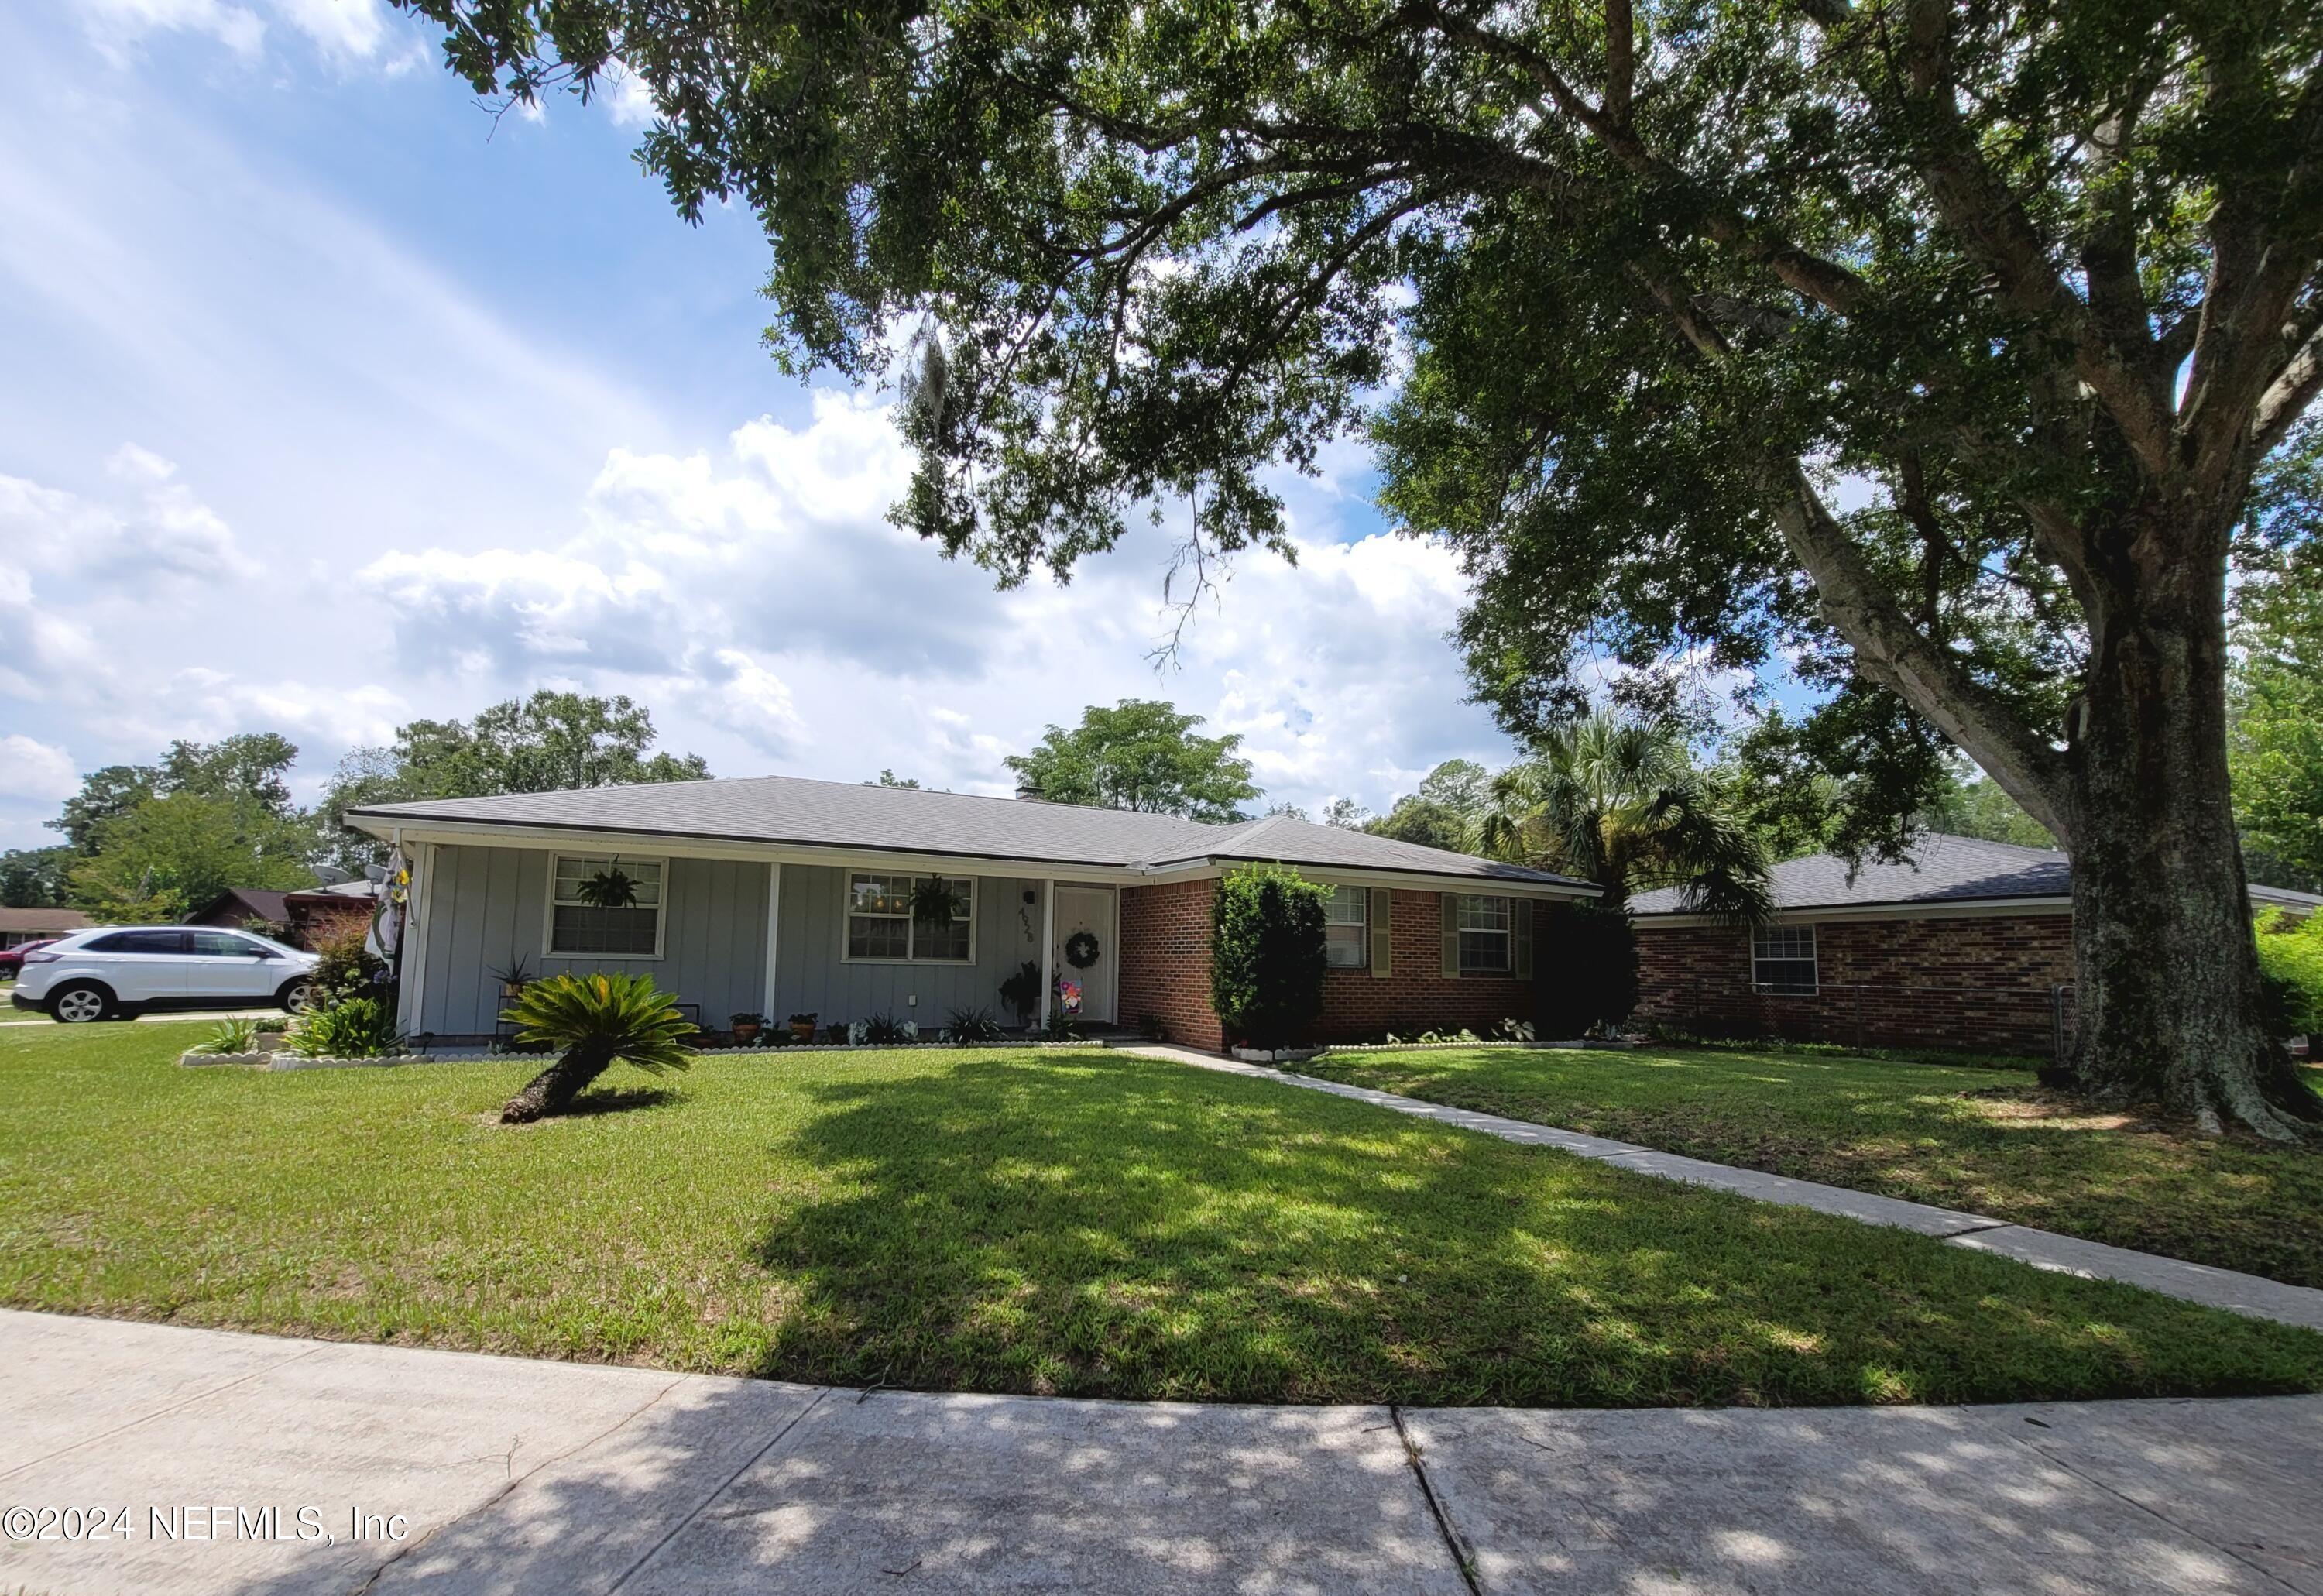 Jacksonville, FL home for sale located at 4928 RED PINE Court, Jacksonville, FL 32210